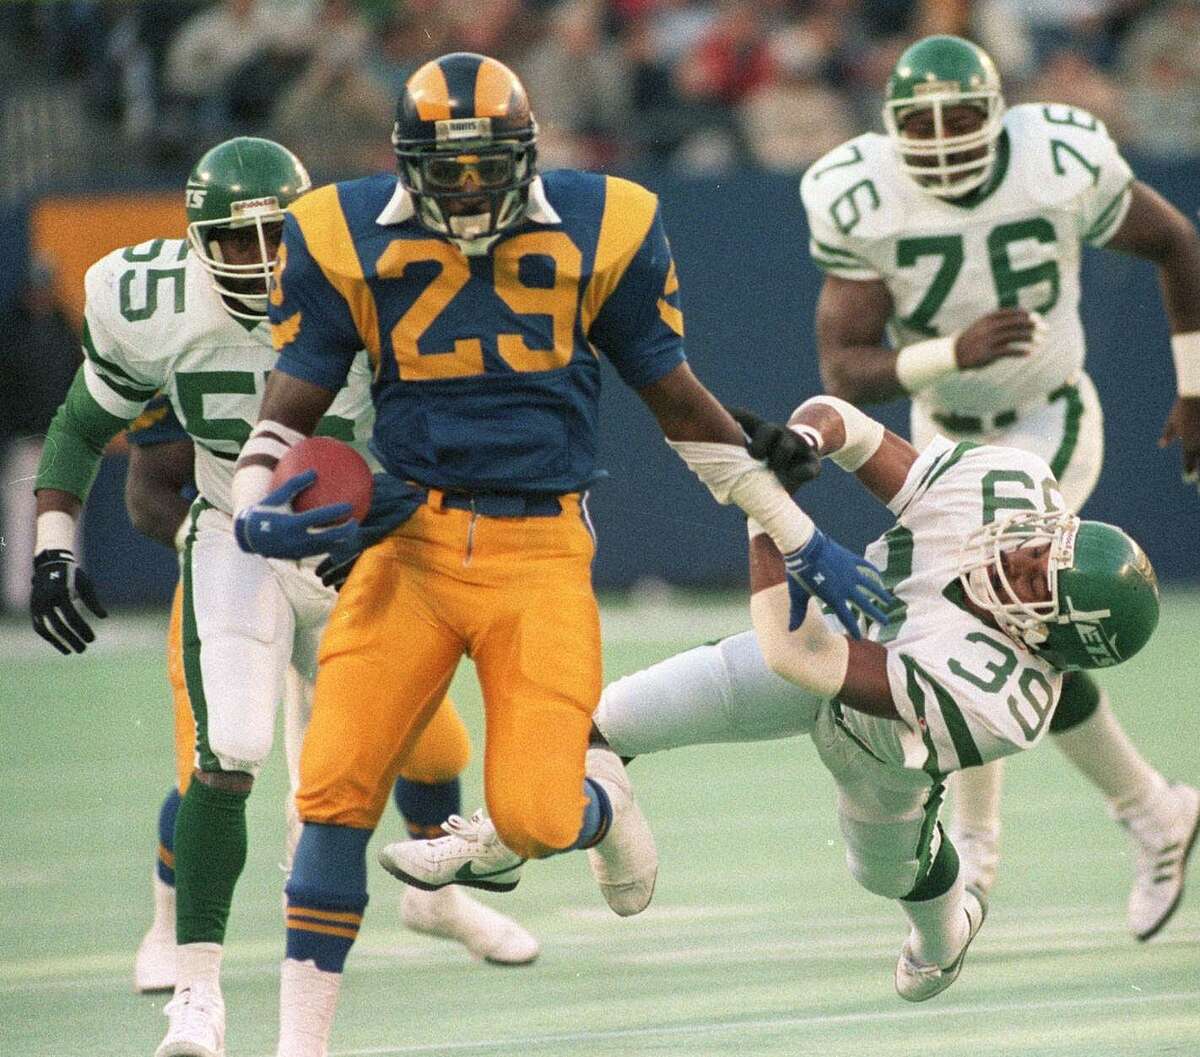 Los Angles Rams running back Eric Dickerson (29) pushes away New York Jets defender Harry Hamilton (39) for a long gain in this Nov. 30, 1986 at Giants Stadium in East Rutherford,. N.J.